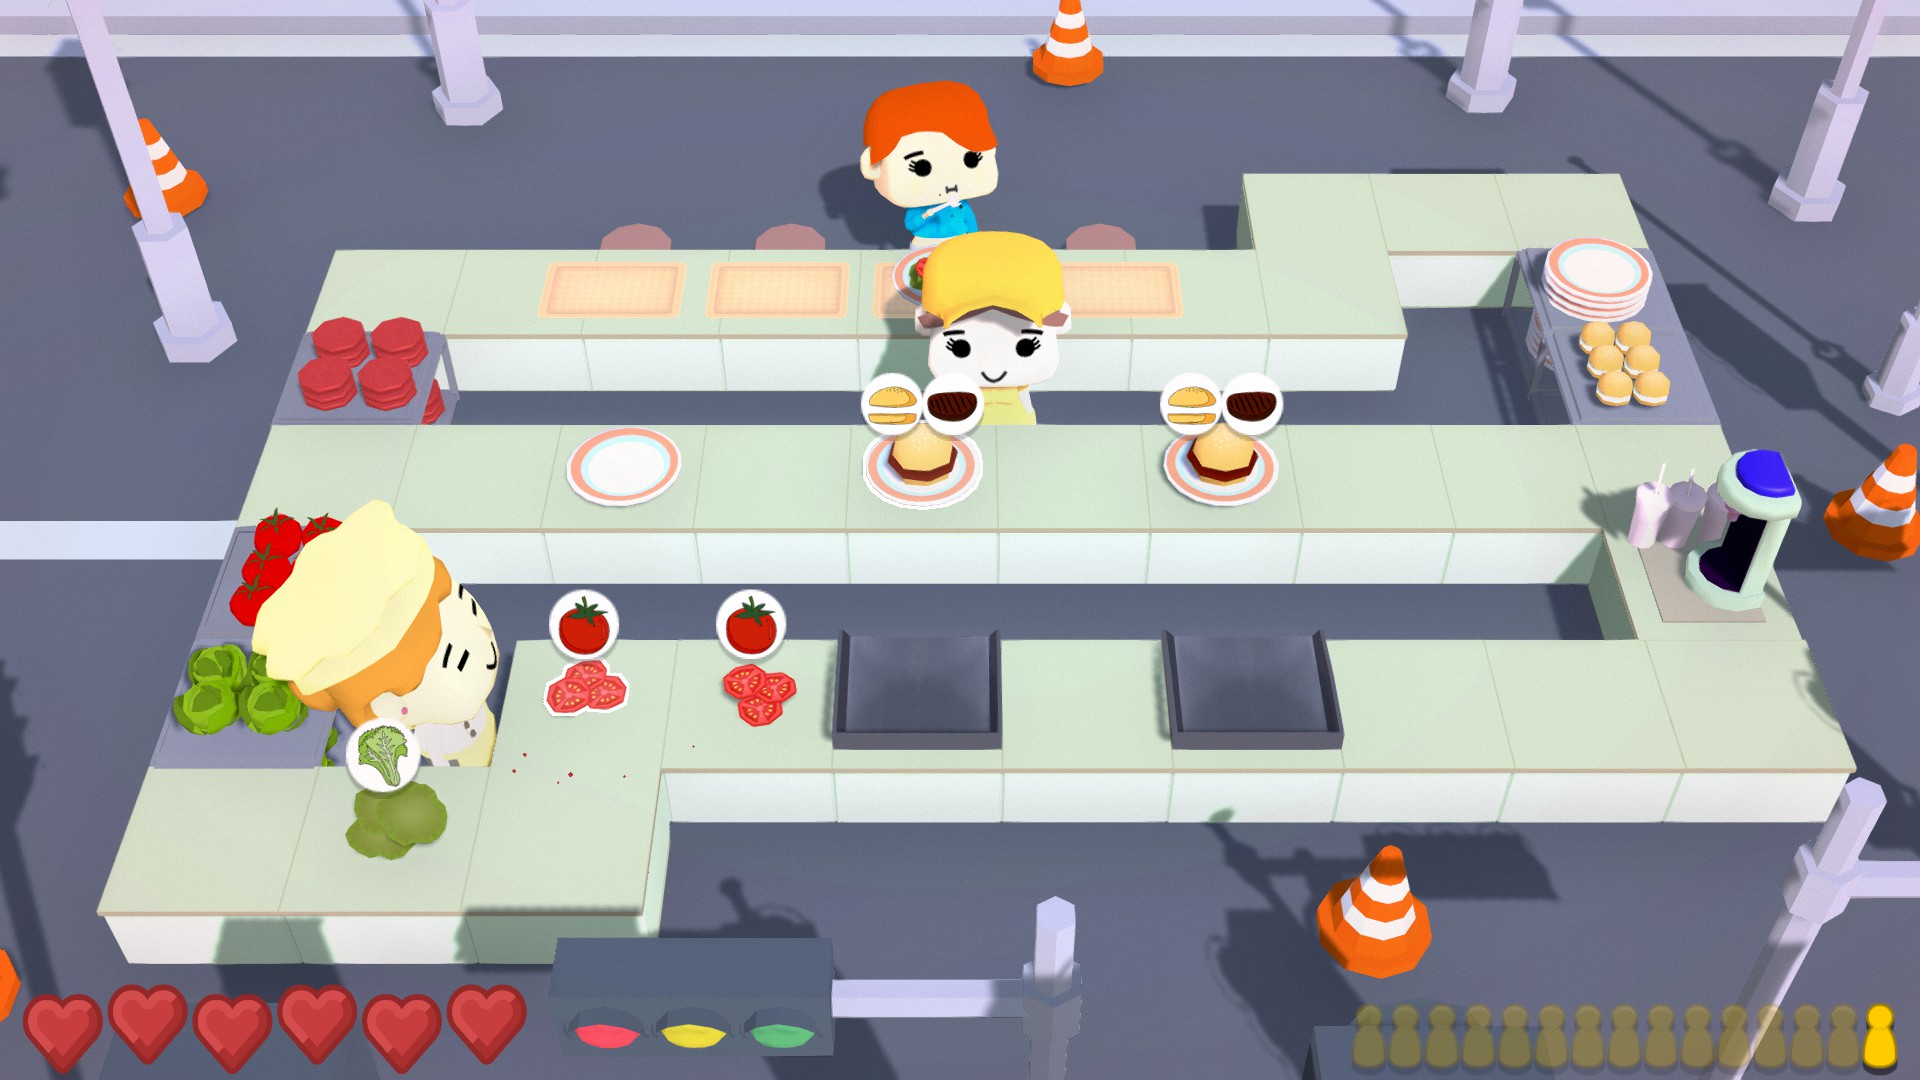 diner bros the game free